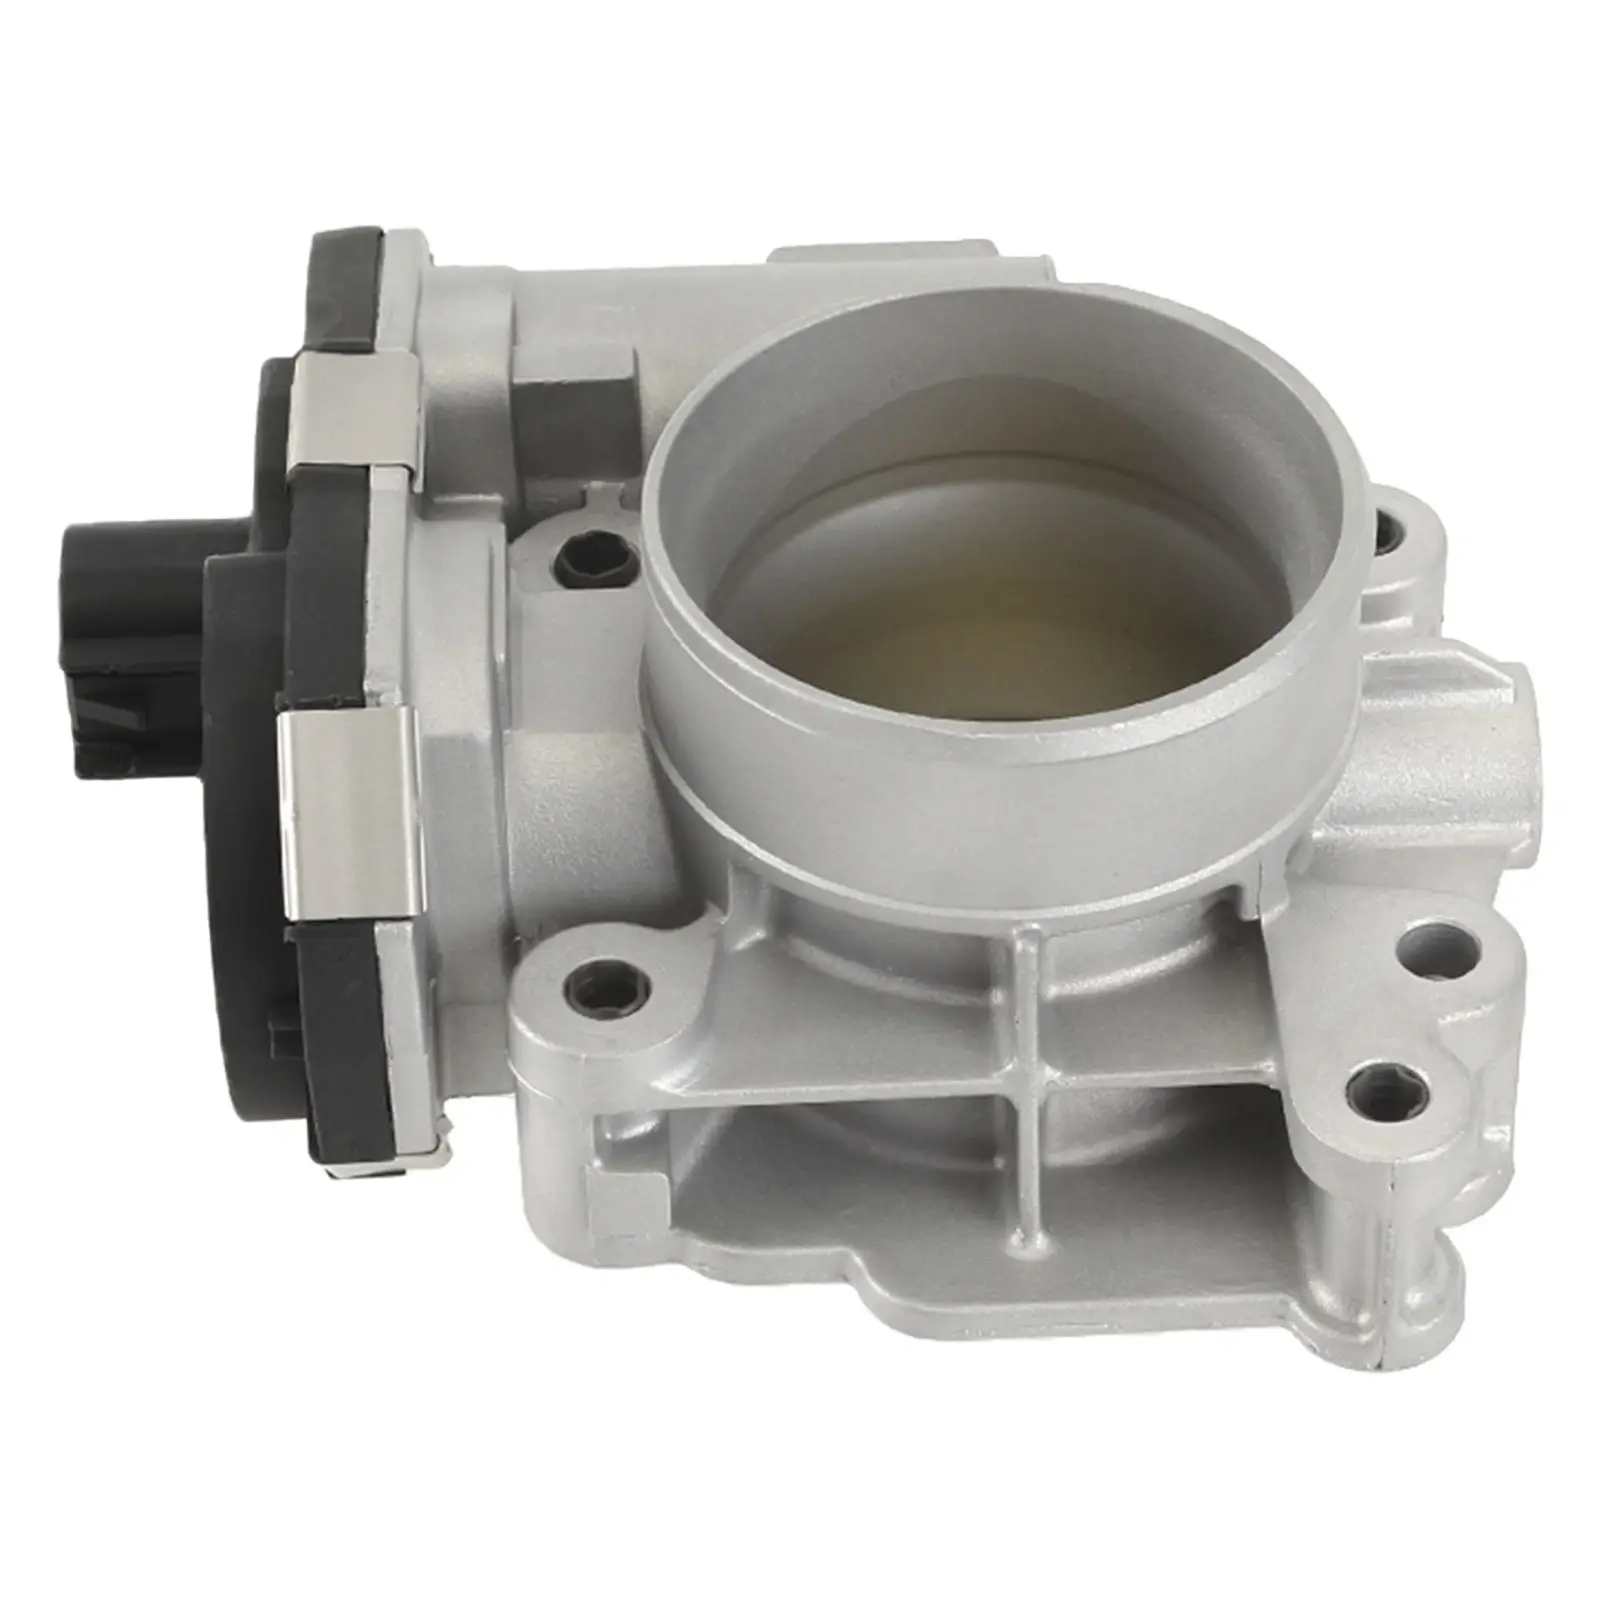 Throttle Body Valve Aembly TB1087 for  Regal 2.0 Turbocharged Engines